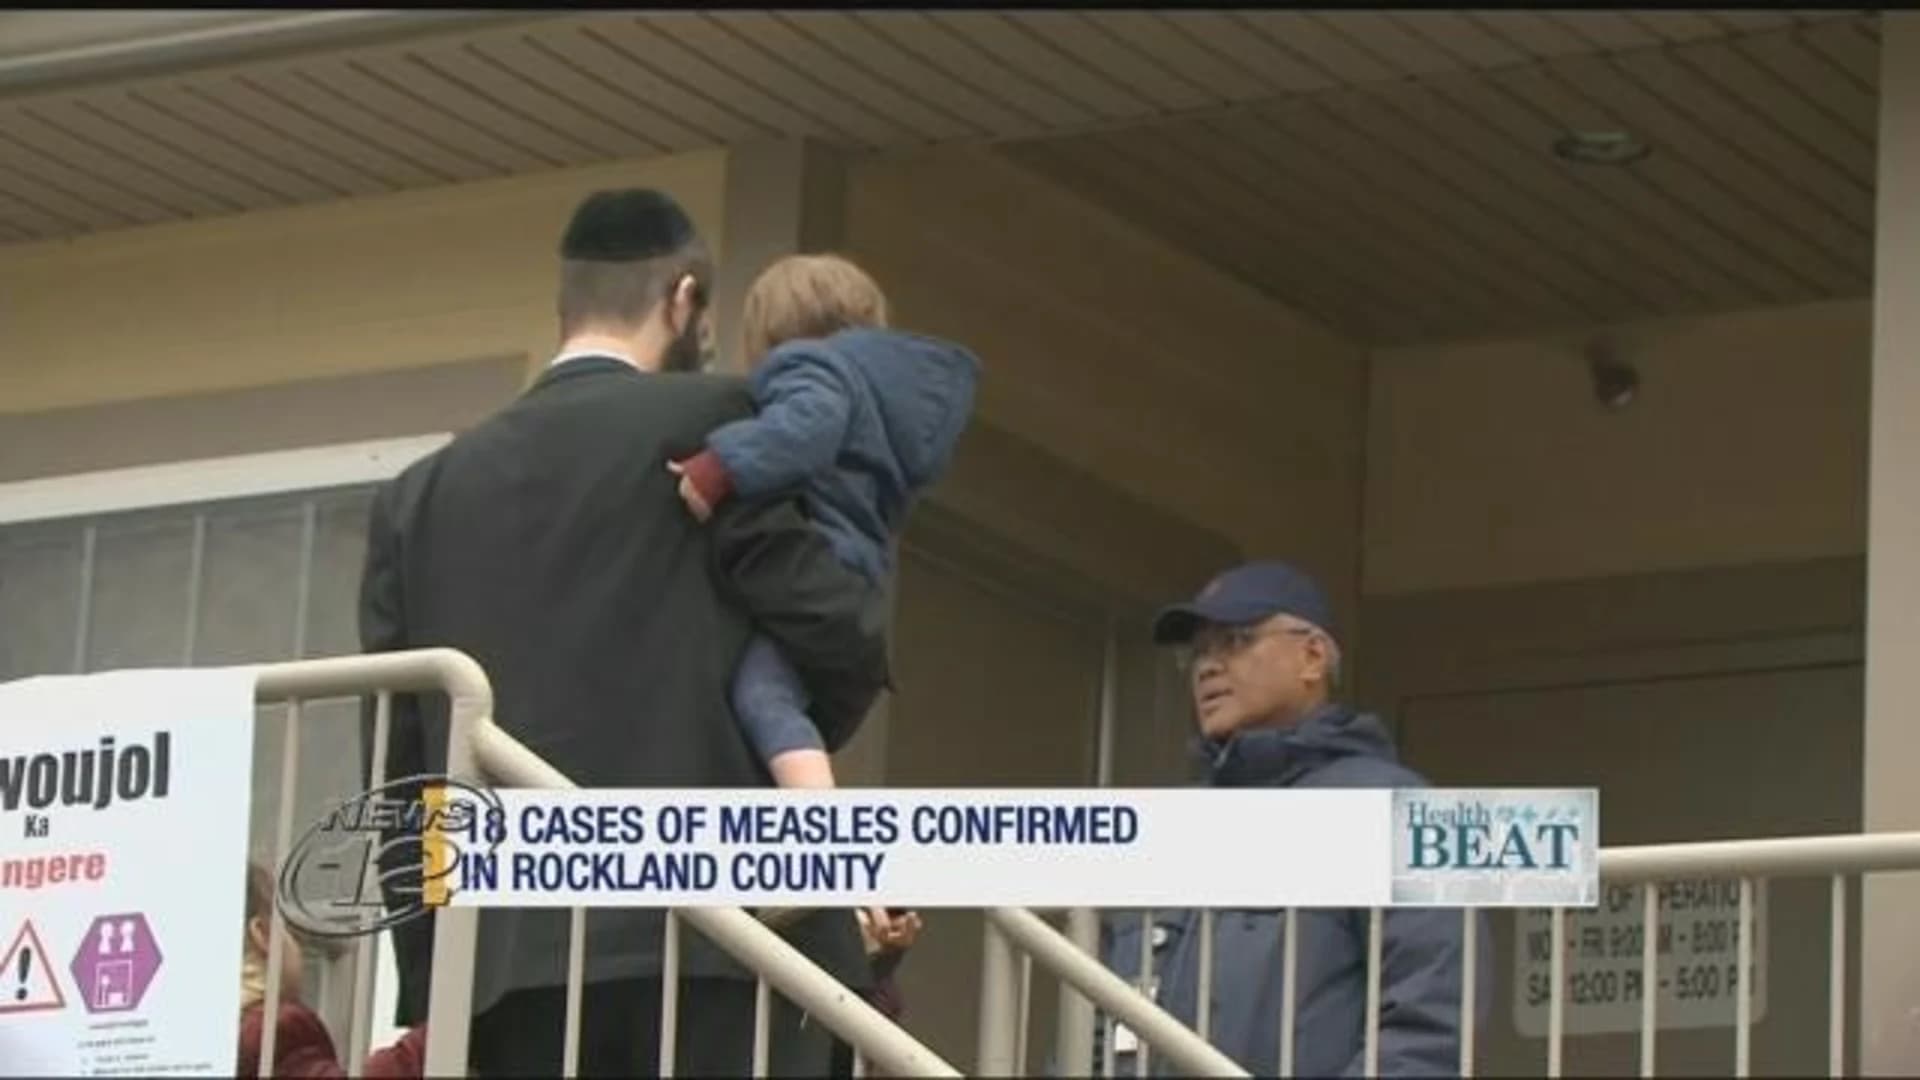 Measles cases in Rockland County on the rise